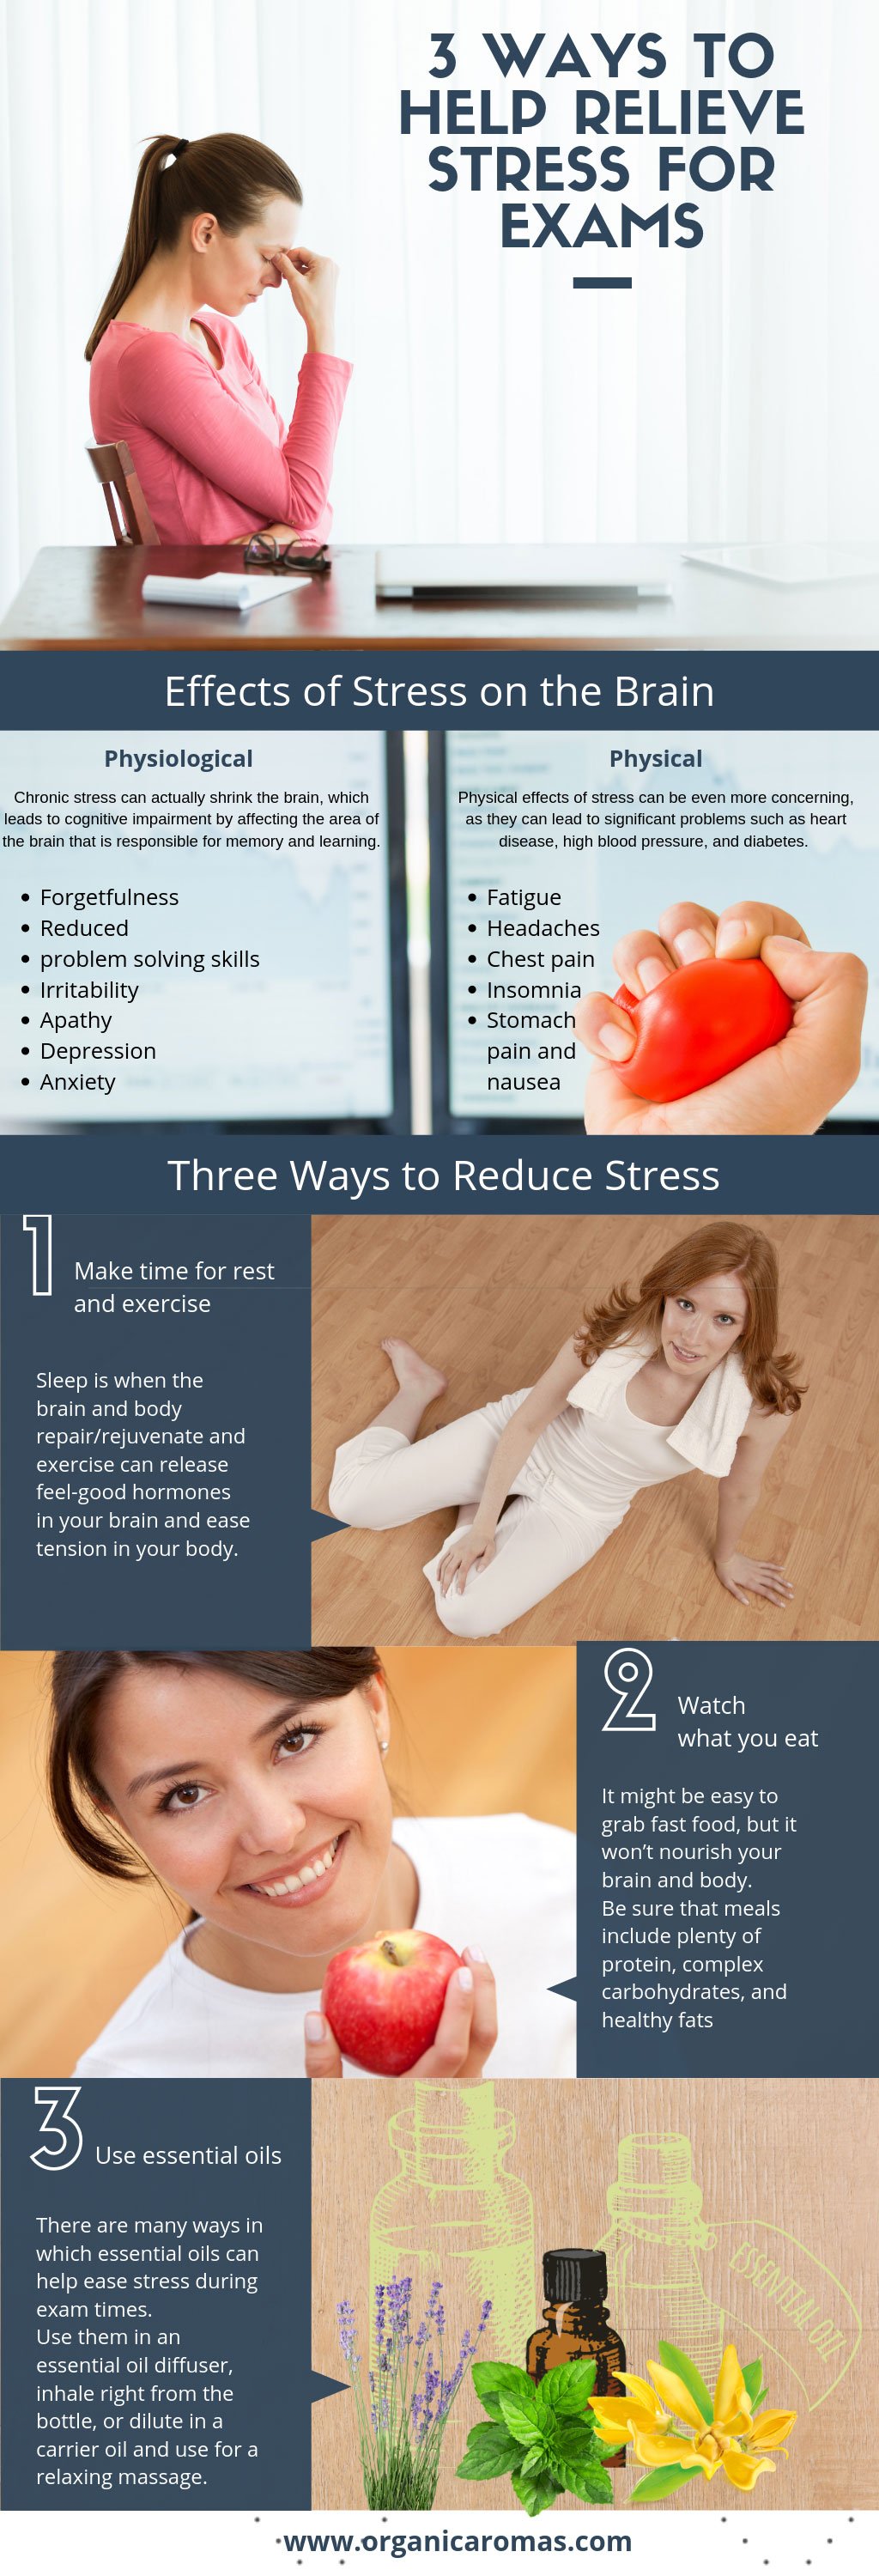 Stress-relieving Tips 